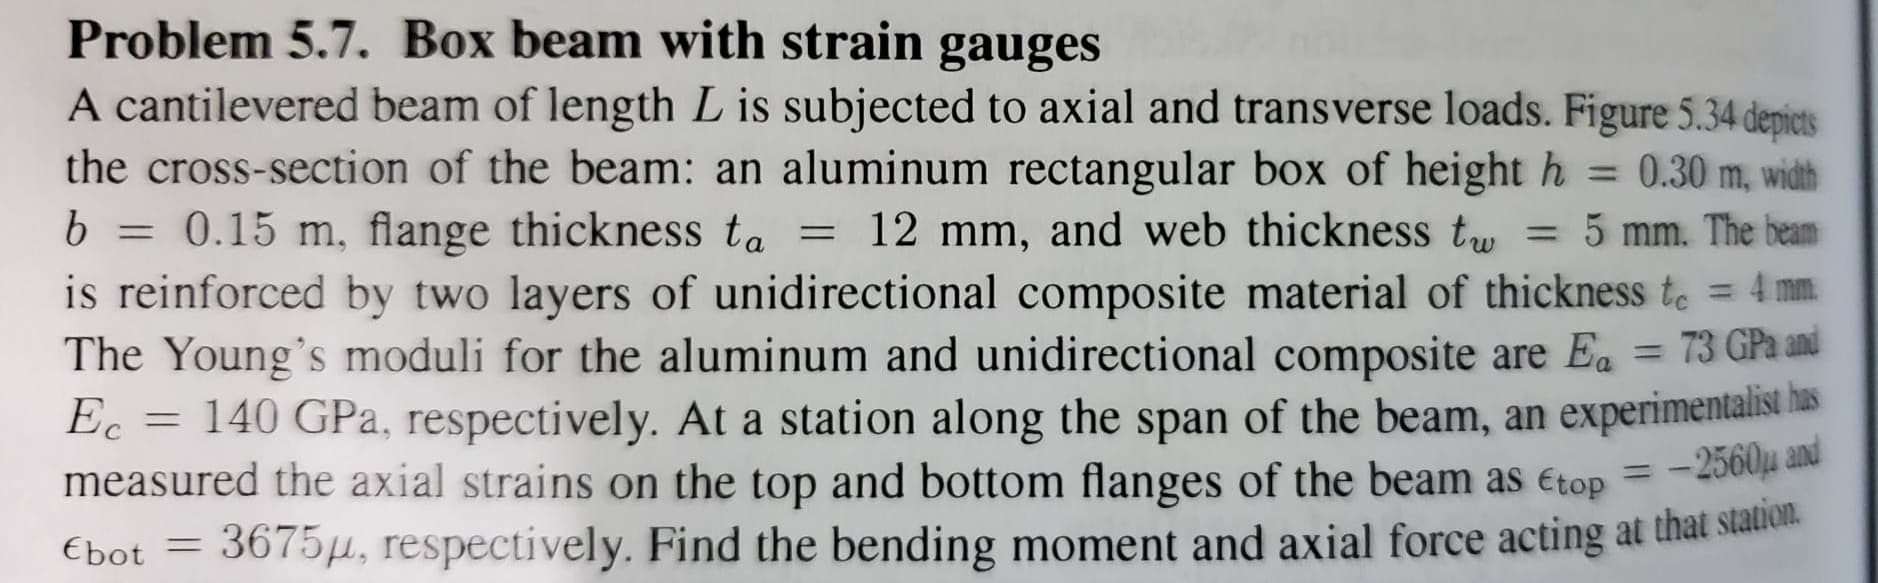 Problem 5.7. Box beam with strain gauges
A cantilevered beam of length L is subjected to axial and transverse loads. Figure 5.34 depicts
the cross-section of the beam: an aluminum rectangular box of height h = 0.30 m, width
b = 0.15 m, flange thickness ta
%3D
= 12 mm, and web thickness t, = 5 mm. The beam
is reinforced by two layers of unidirectional composite material of thickness te = 4 mm.
The Young's moduli for the aluminum and unidirectional composite are Ea = 73 GPa and
Ec = 140 GPa, respectively. At a station along the span of the beam, an experimentalist has
measured the axial strains on the top and bottom flanges of the beam as Etop = -20a e
%3D
-2560u and
3675µ, respectively. Find the bending moment and axial force acting at that siation.
%3D
Ebot =
